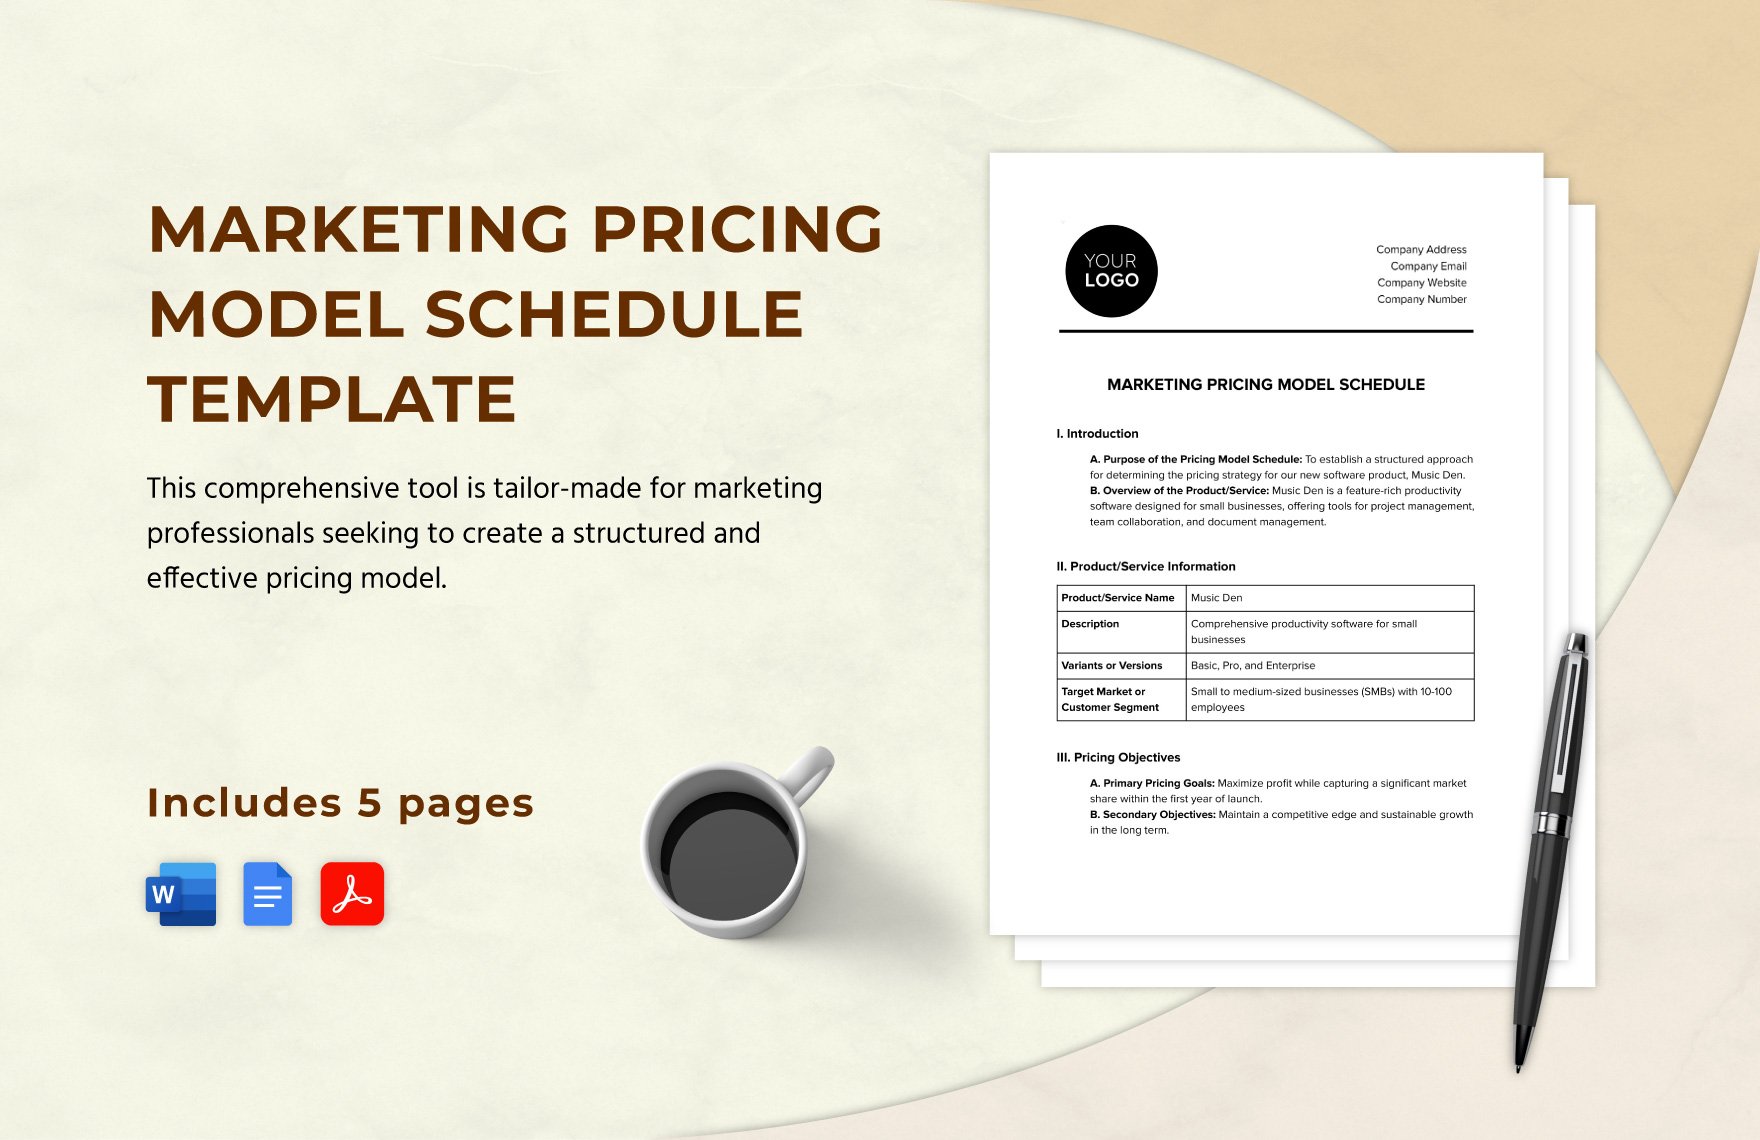 Marketing Pricing Model Schedule Template in Word, Google Docs, PDF